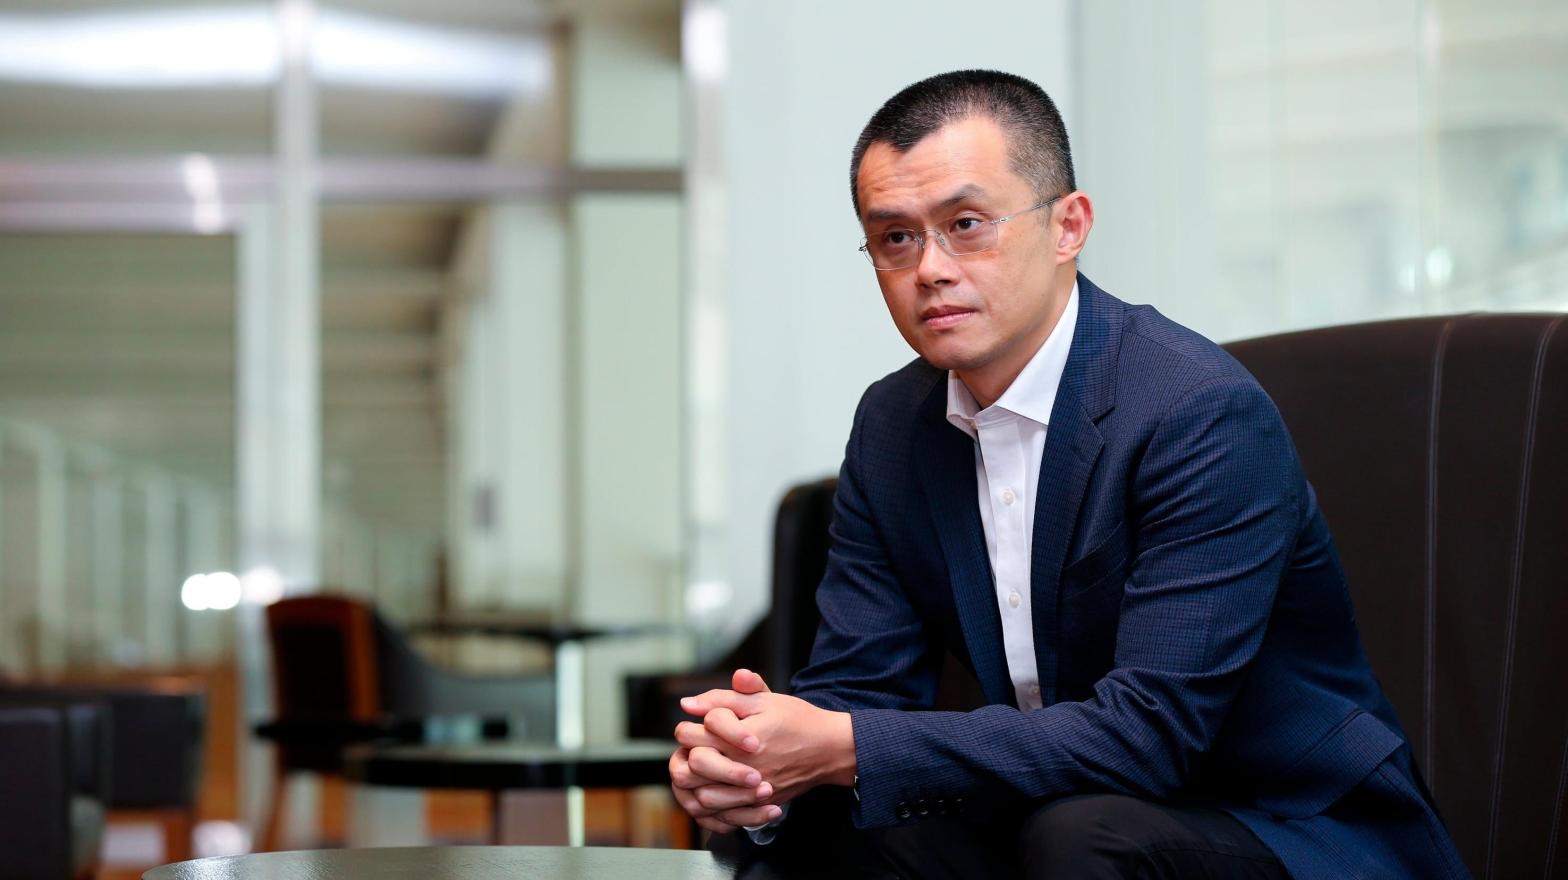 Changpeng Zhao, the CEO of Binance, has been making the rounds trying to convince the world his exchange is financially stable, even though he has resisted a full-scale audit. (Photo: Singapore Press, AP)